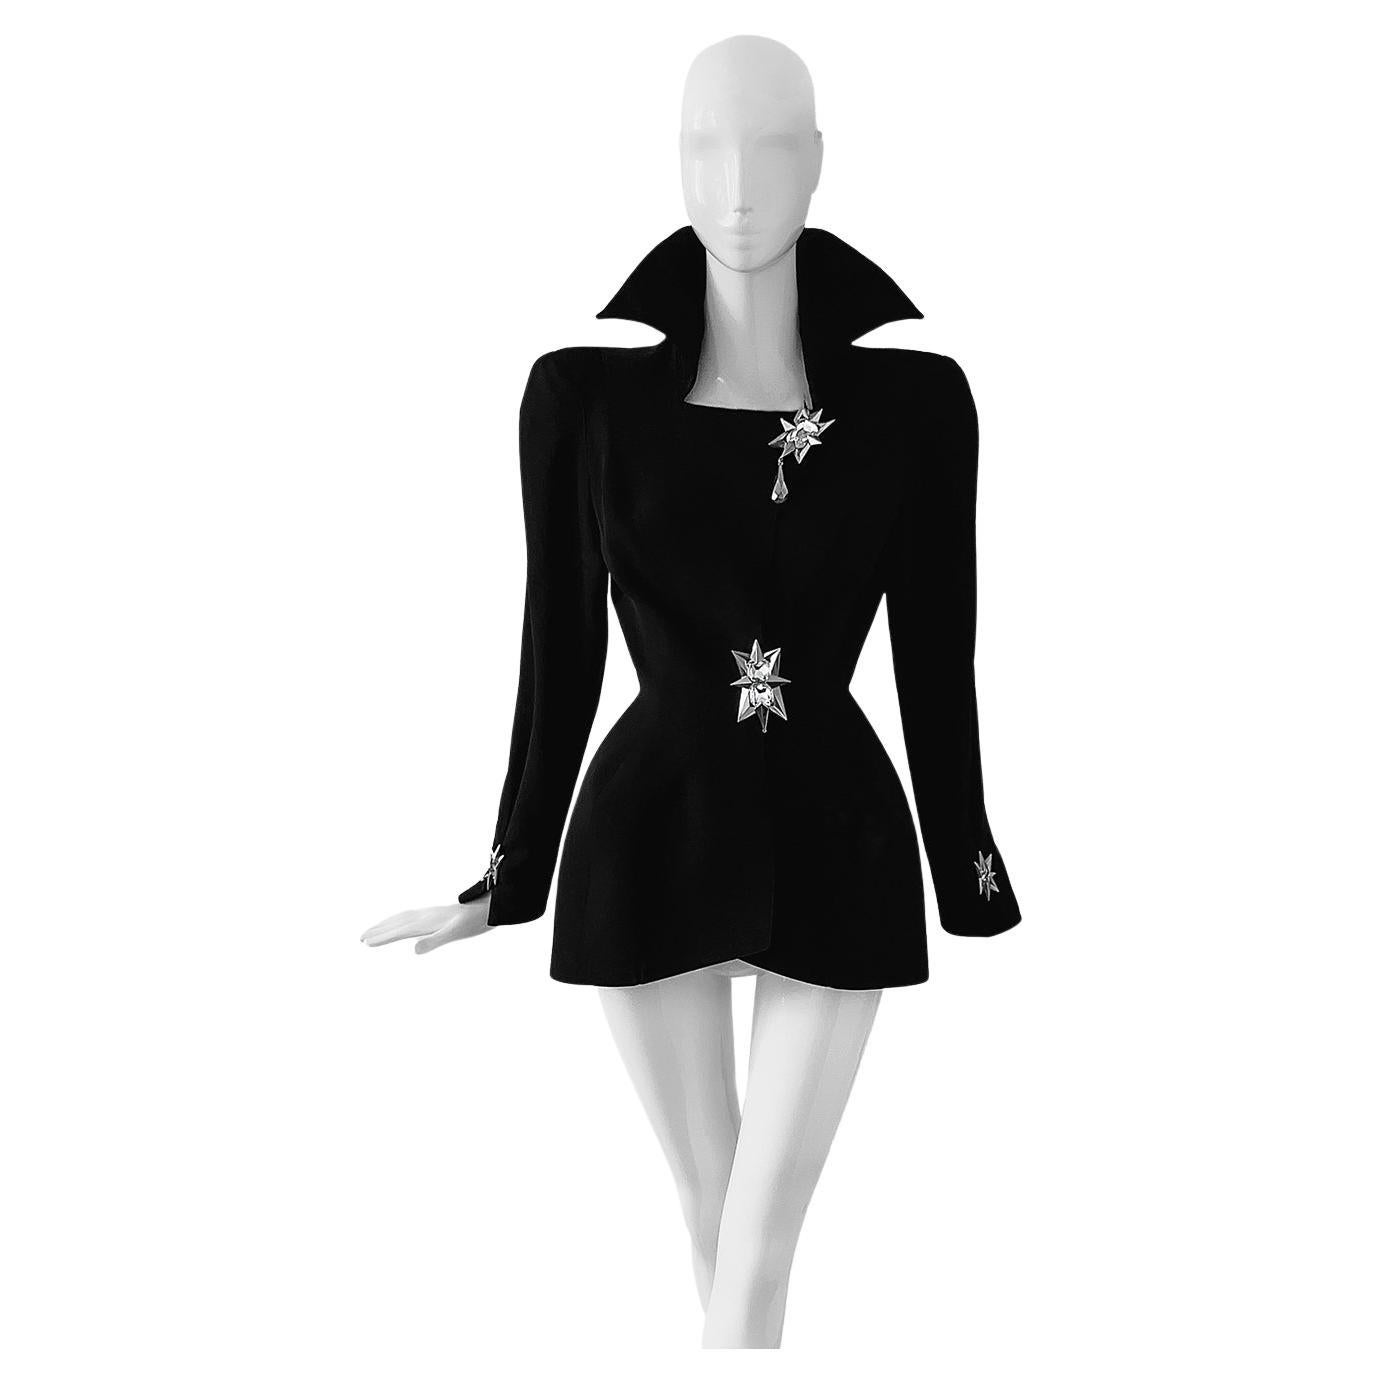 Spectacular Thierry Mugler Jacket Crystal Jewel Black Dramatic Sculptural  For Sale